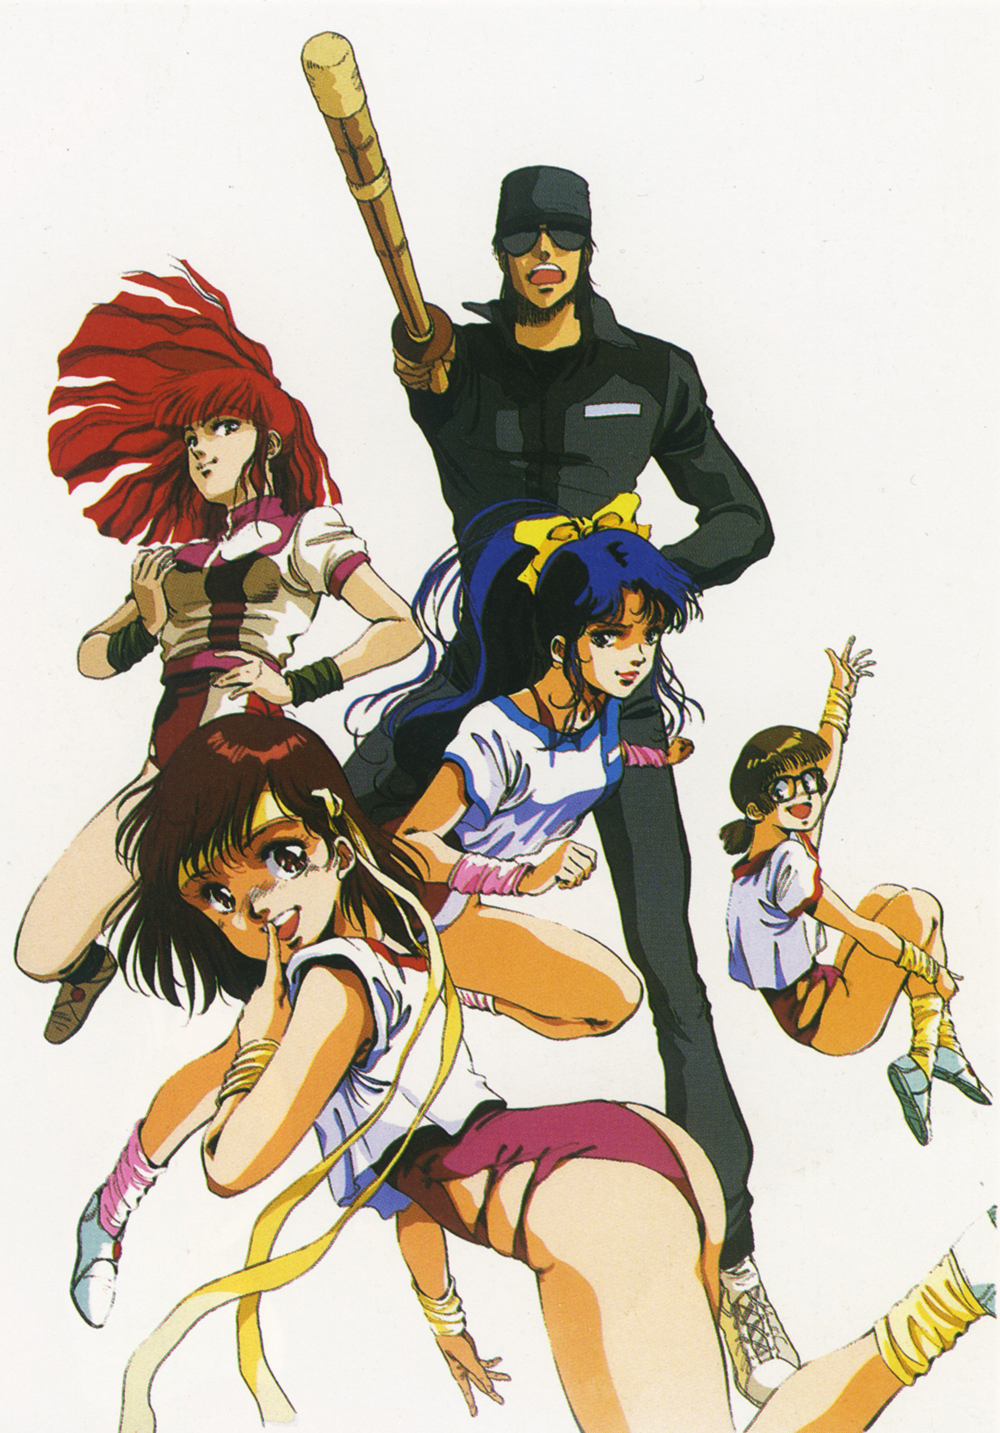 4girls 80s amano_kazumi arm_up blue_hair brown_eyes brown_hair finger_to_mouth floating_hair headband highres higuchi_kimiko holding holding_weapon jung_freud leotard lipstick long_sleeves looking_at_viewer makeup md5_mismatch mikimoto_haruhiko multiple_girls official_art oldschool open_mouth ponytail purple_leotard red_hair red_leotard scan shinai shoes short_sleeves simple_background sneakers sword takaya_noriko tank_top top_wo_nerae! waving weapon white_background